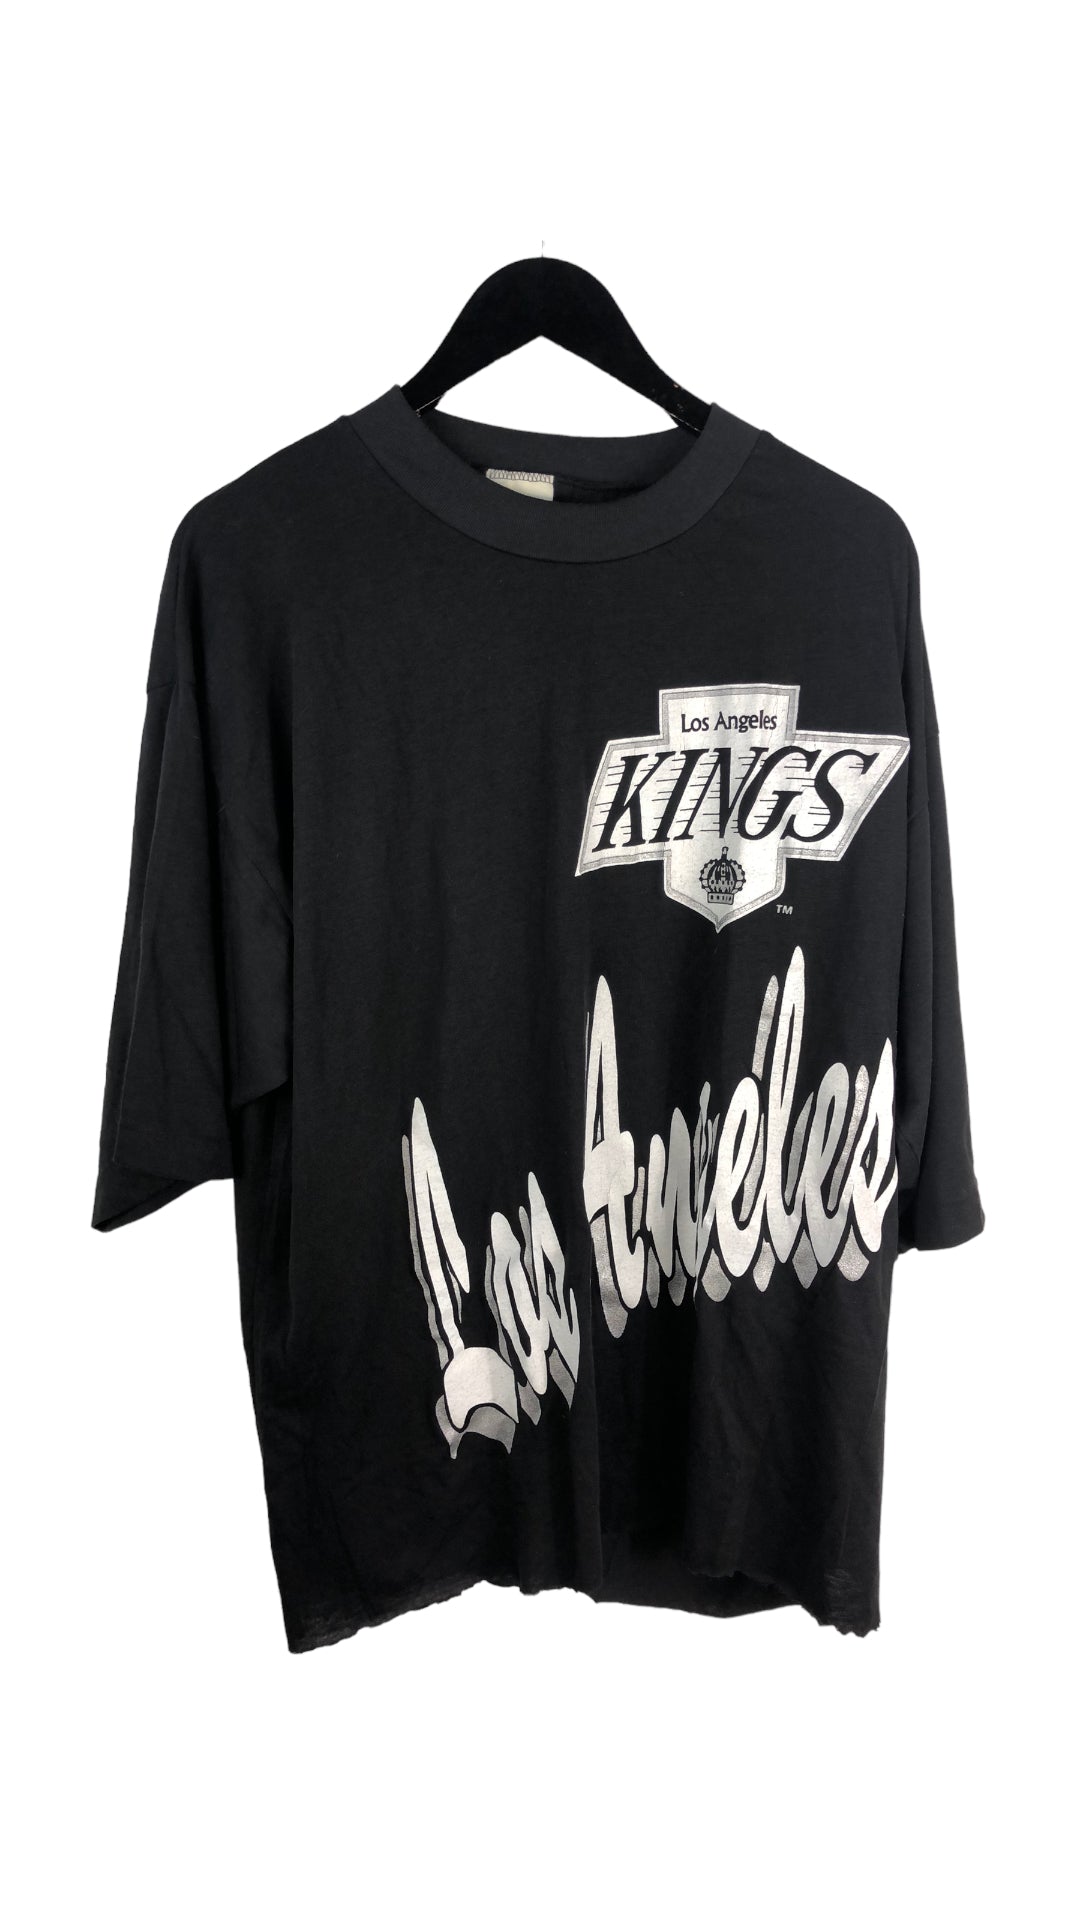 VTG Los Angeles Kings Tee Sz One Size Fits All